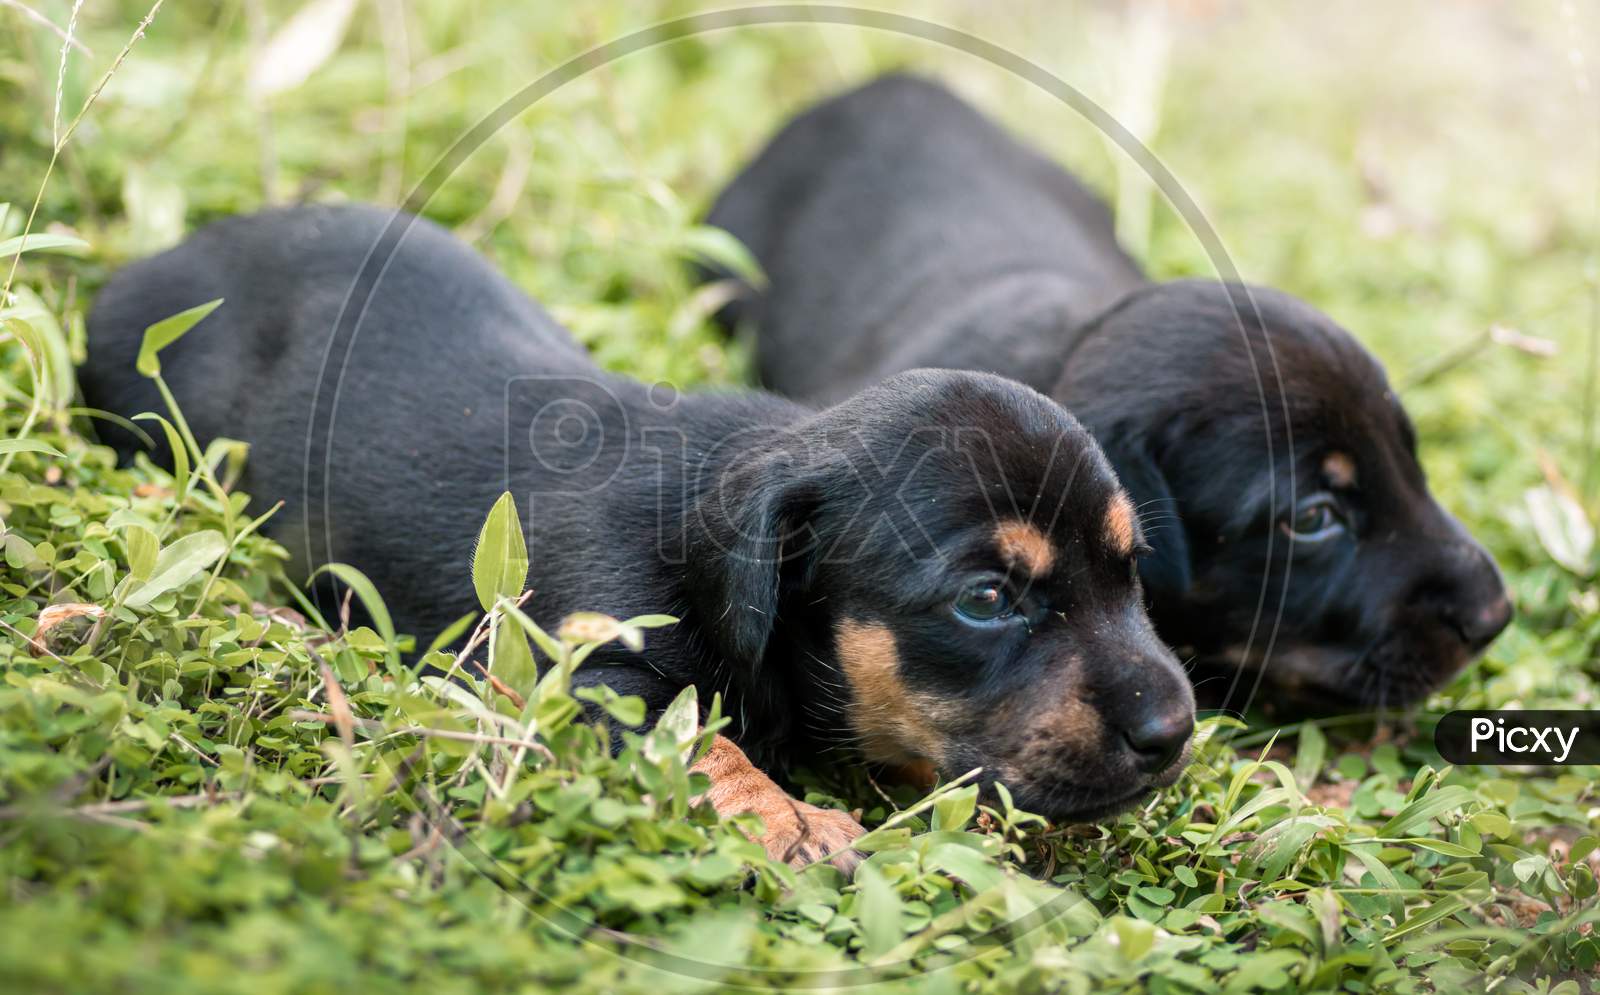 Cute Dachshund Puppies Lying In The Backyard, Cuddle And Play With Newborn Siblings, Explore, Watch And Learn The Environment, Taking Care Of Each Other Concepts, Both Shivering And Trying To Move.